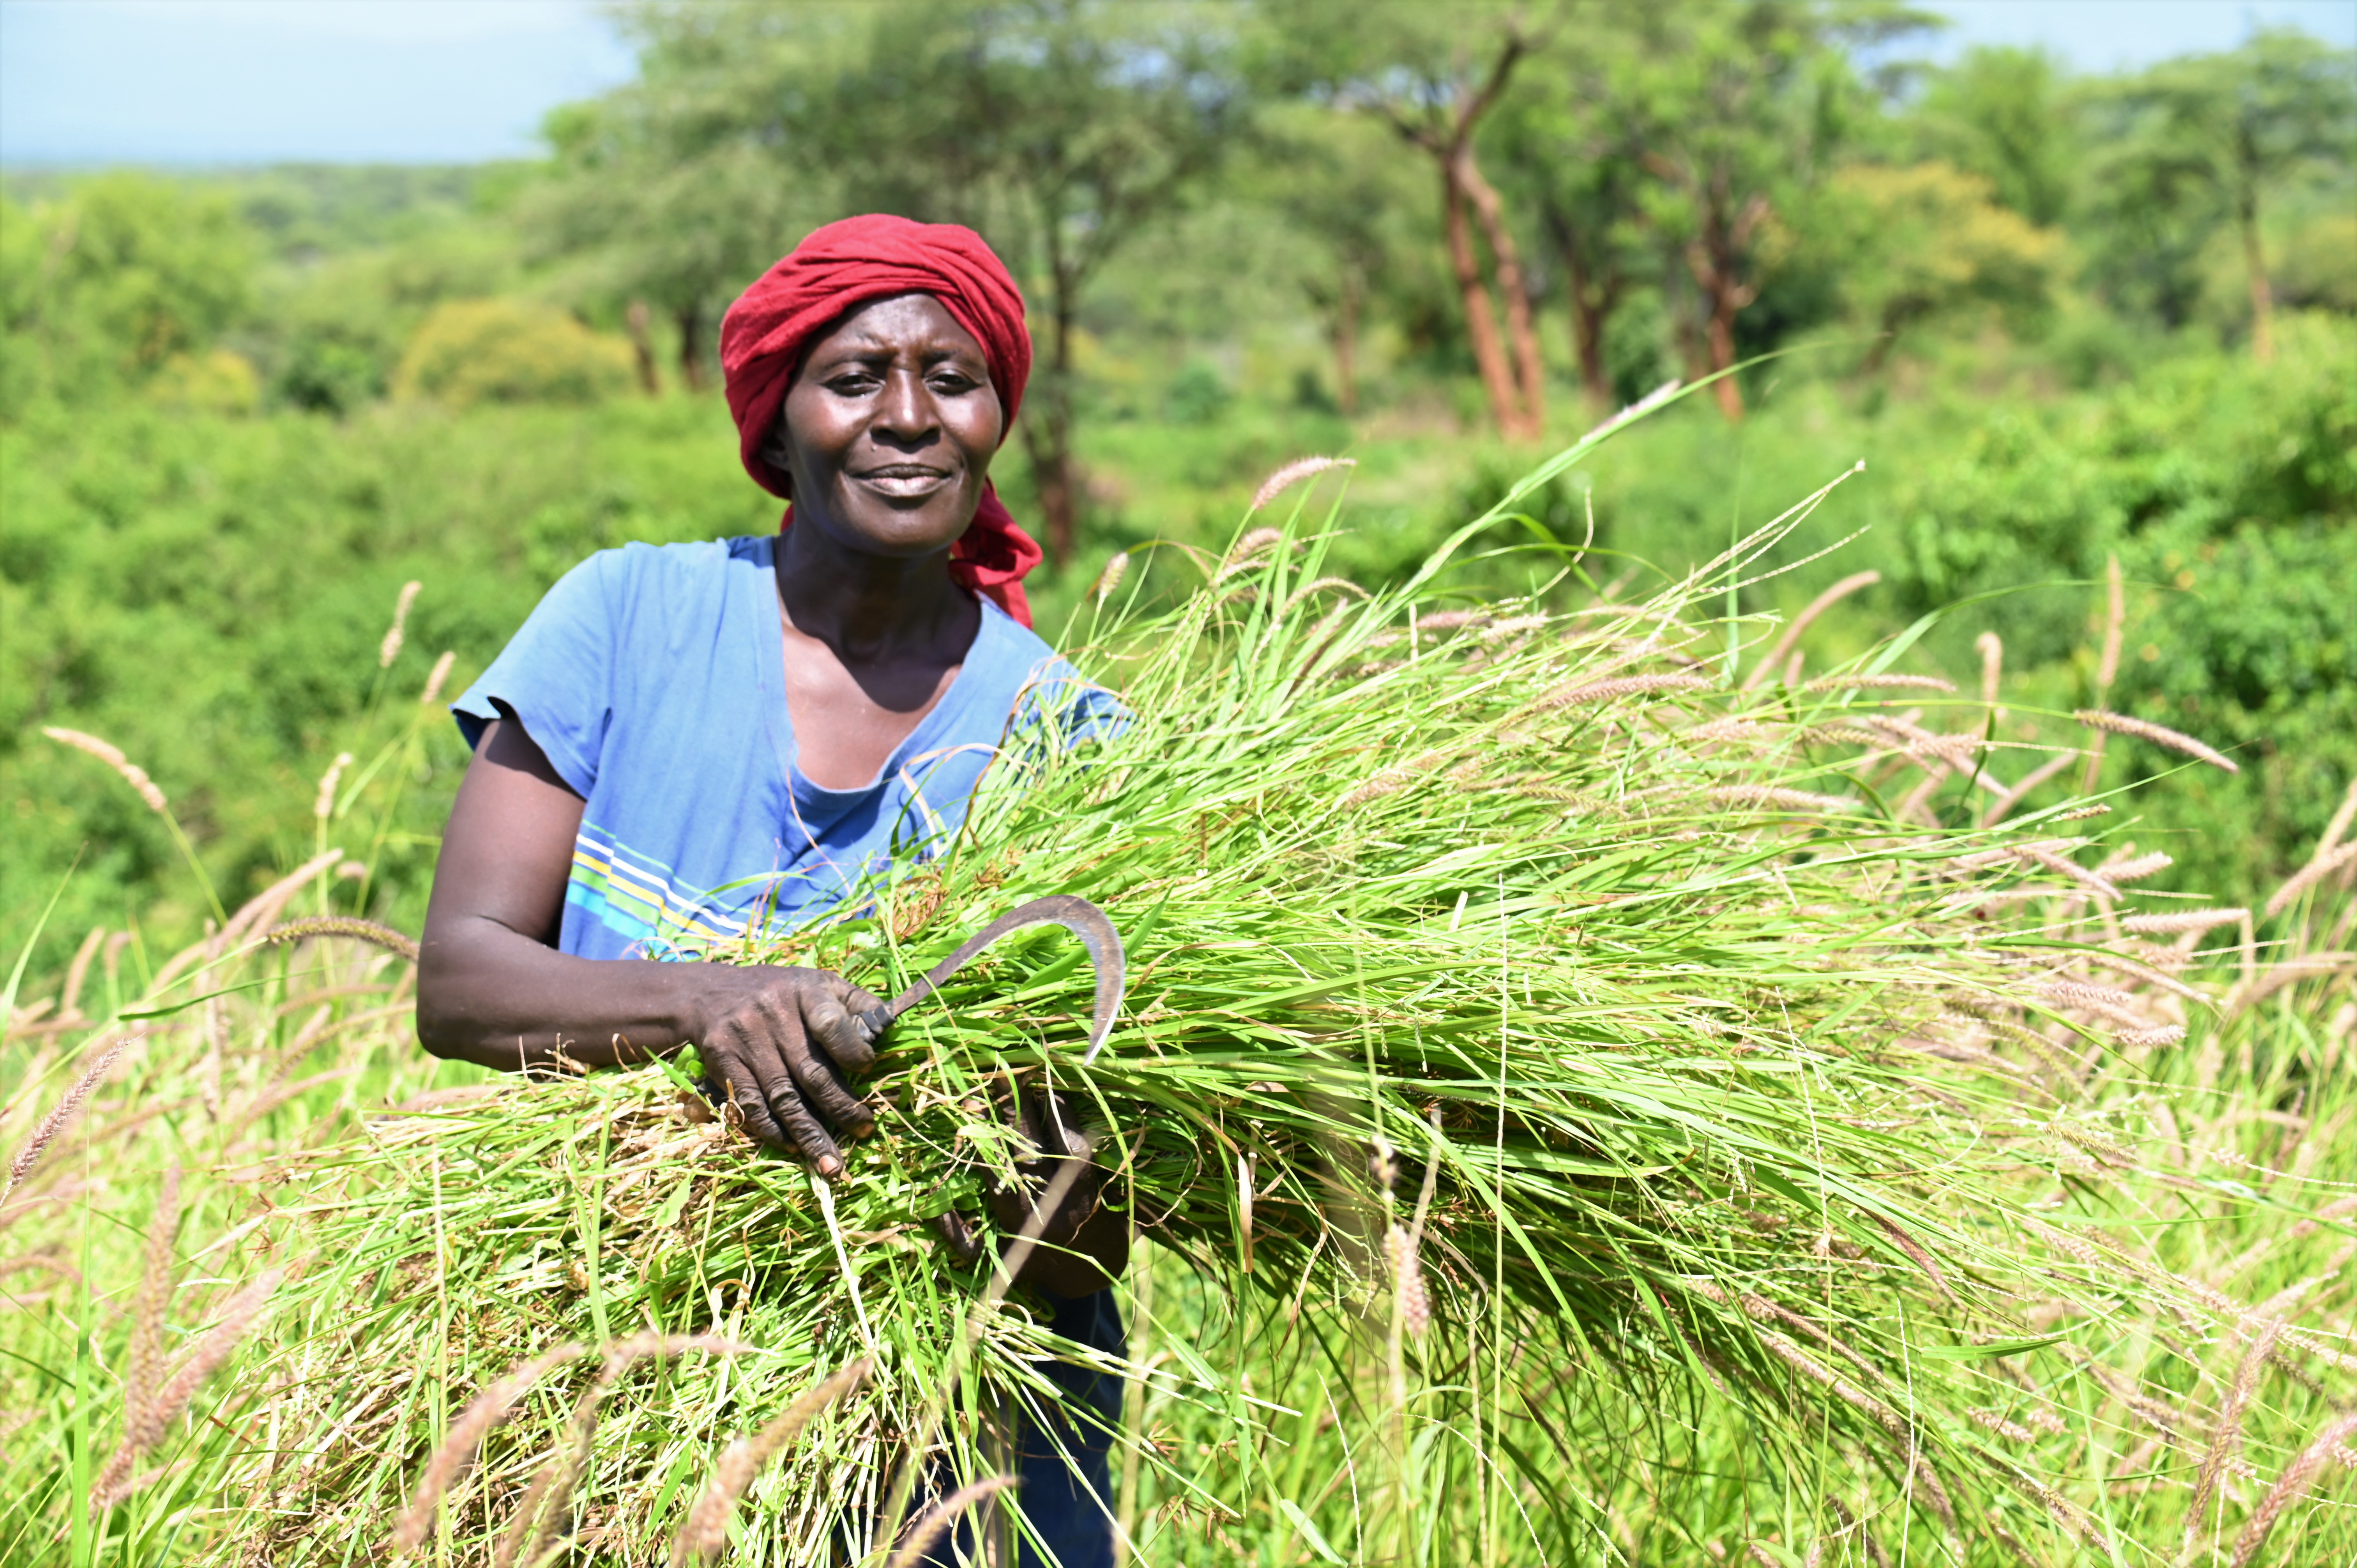 Joyce harvests the Cenchrus Ciliaris commonly known as African foxtail grass that they will dry, grind and store to feed their livestock in future.  ©World Vision Photo/ Hellen Owuor